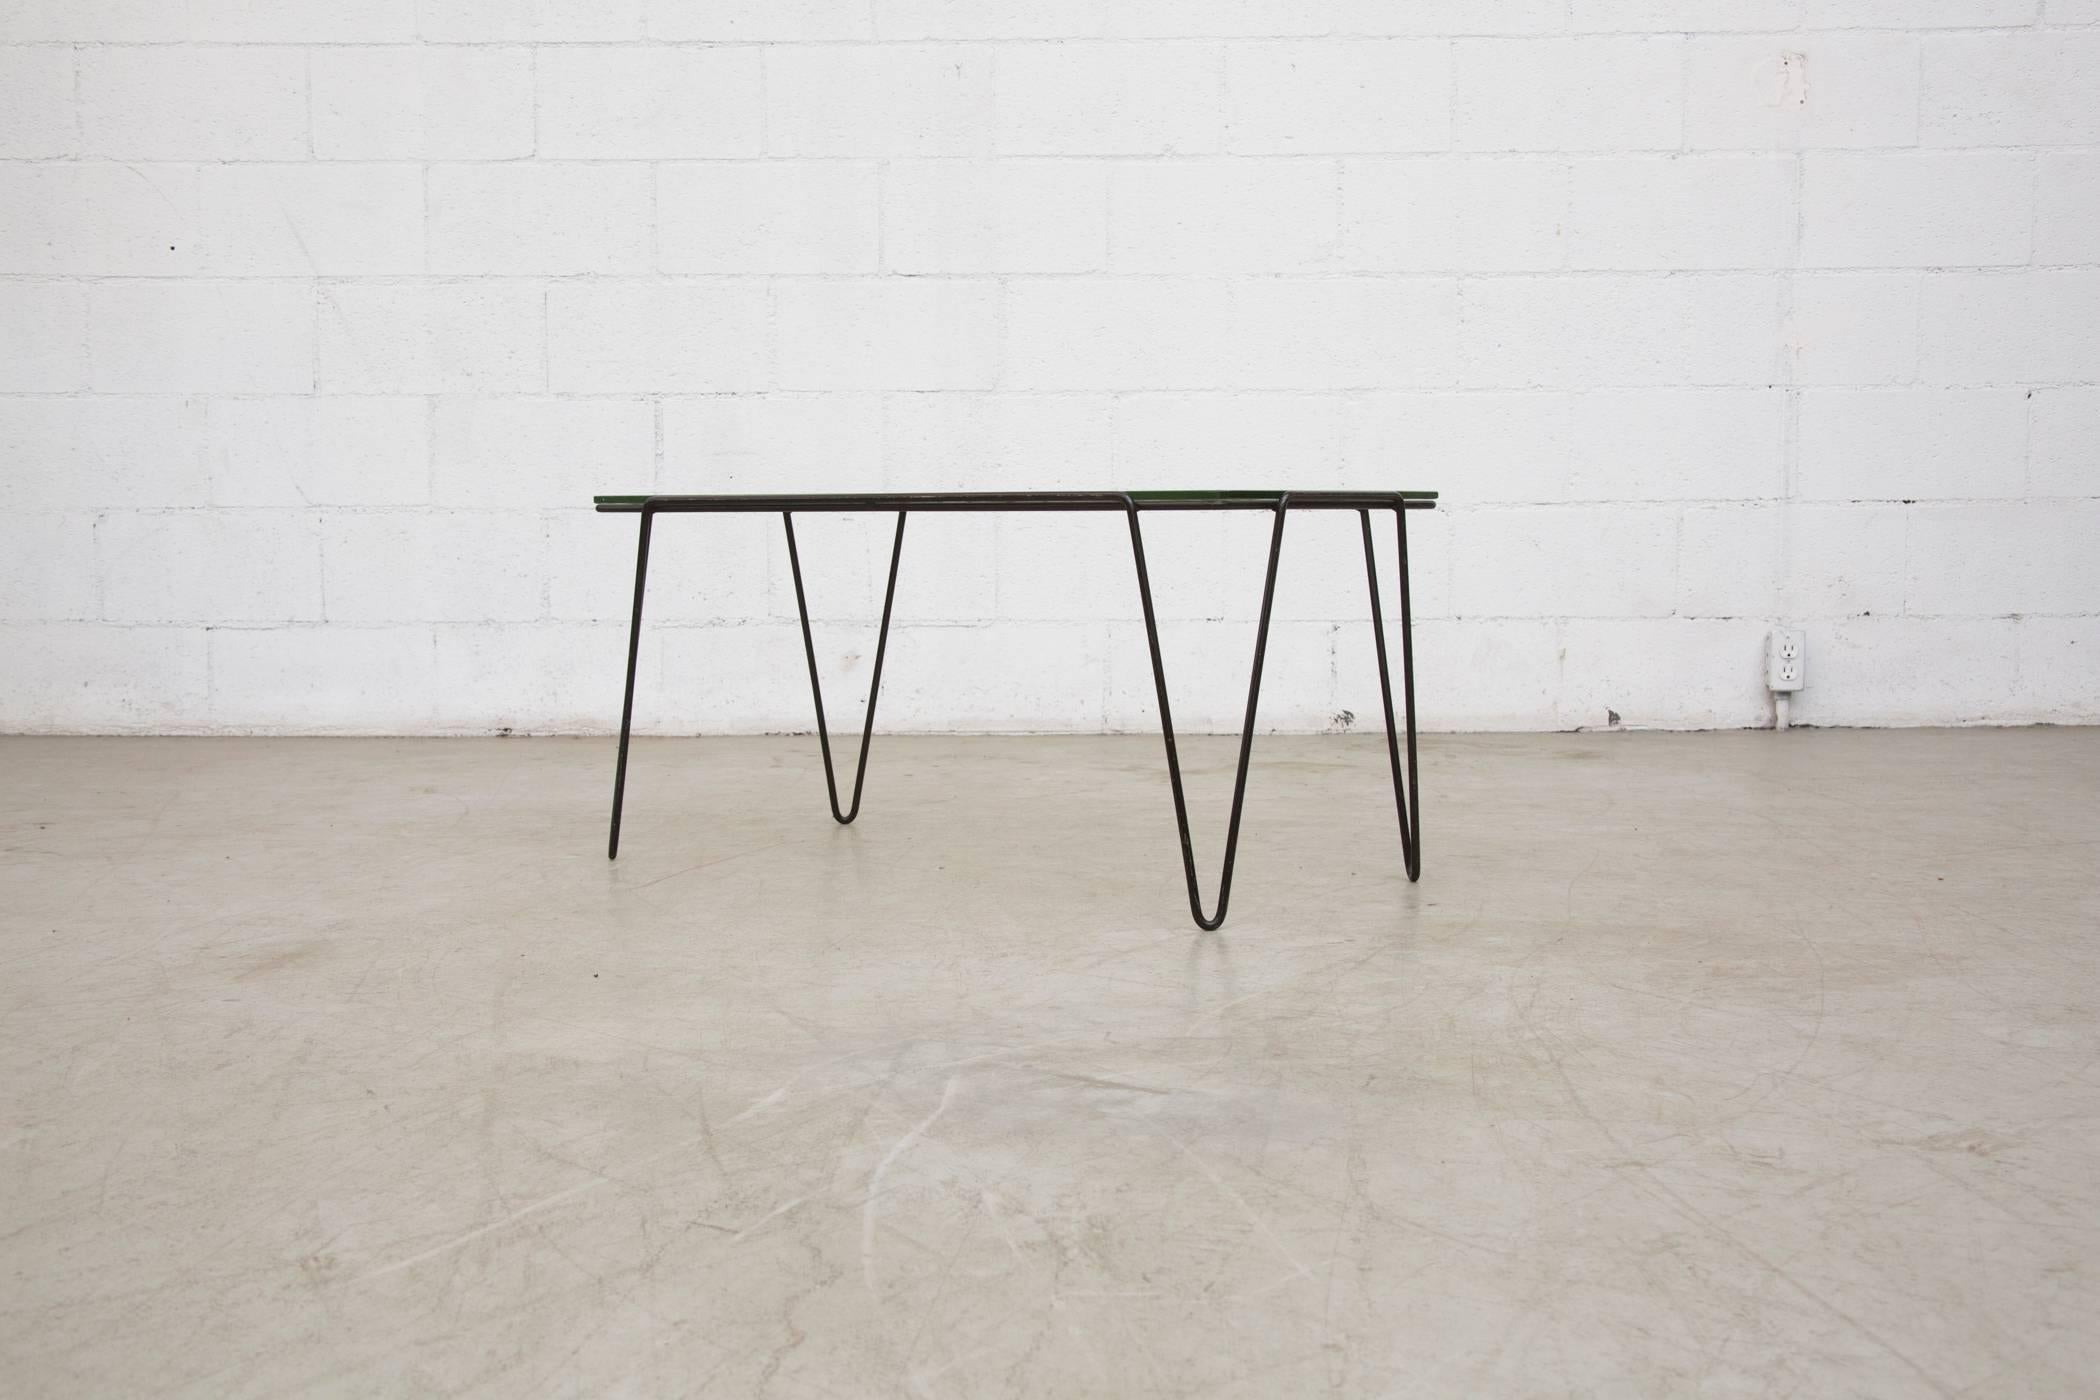 Rare rectangular glass table topped table with black enameled metal hairpin legs was designed for Goed Wonen, 1955. Rippled patio glass is in original condition with visible wear, as is the frame, consistent with its age and usage. Another one is